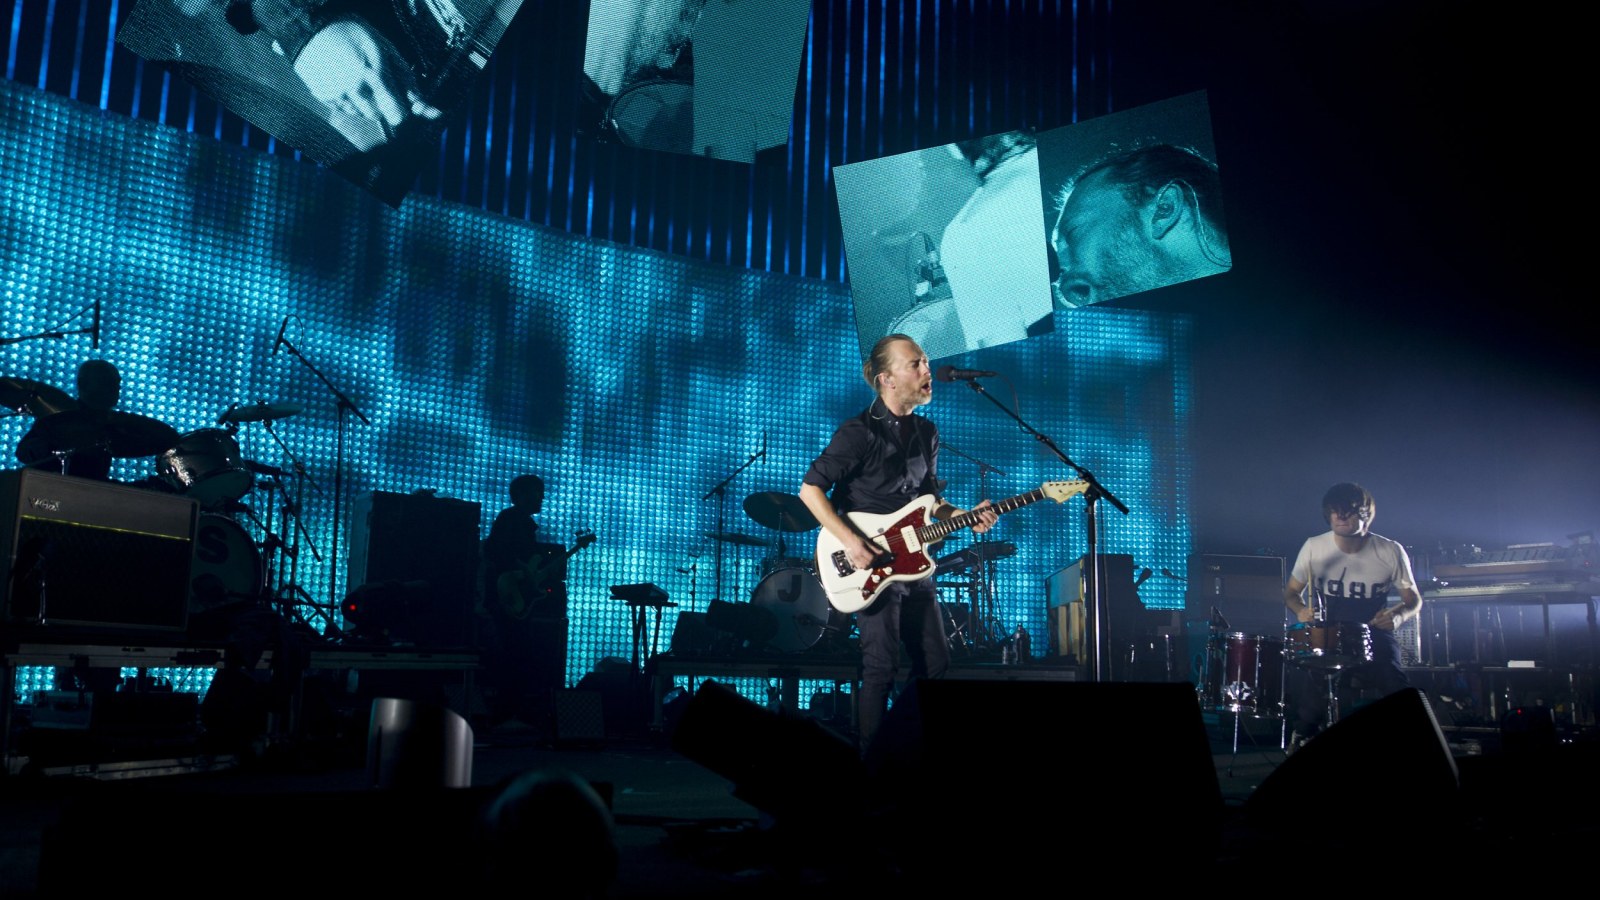 Radiohead Stages Cryptic Online Comeback: Is a New Album Imminent?